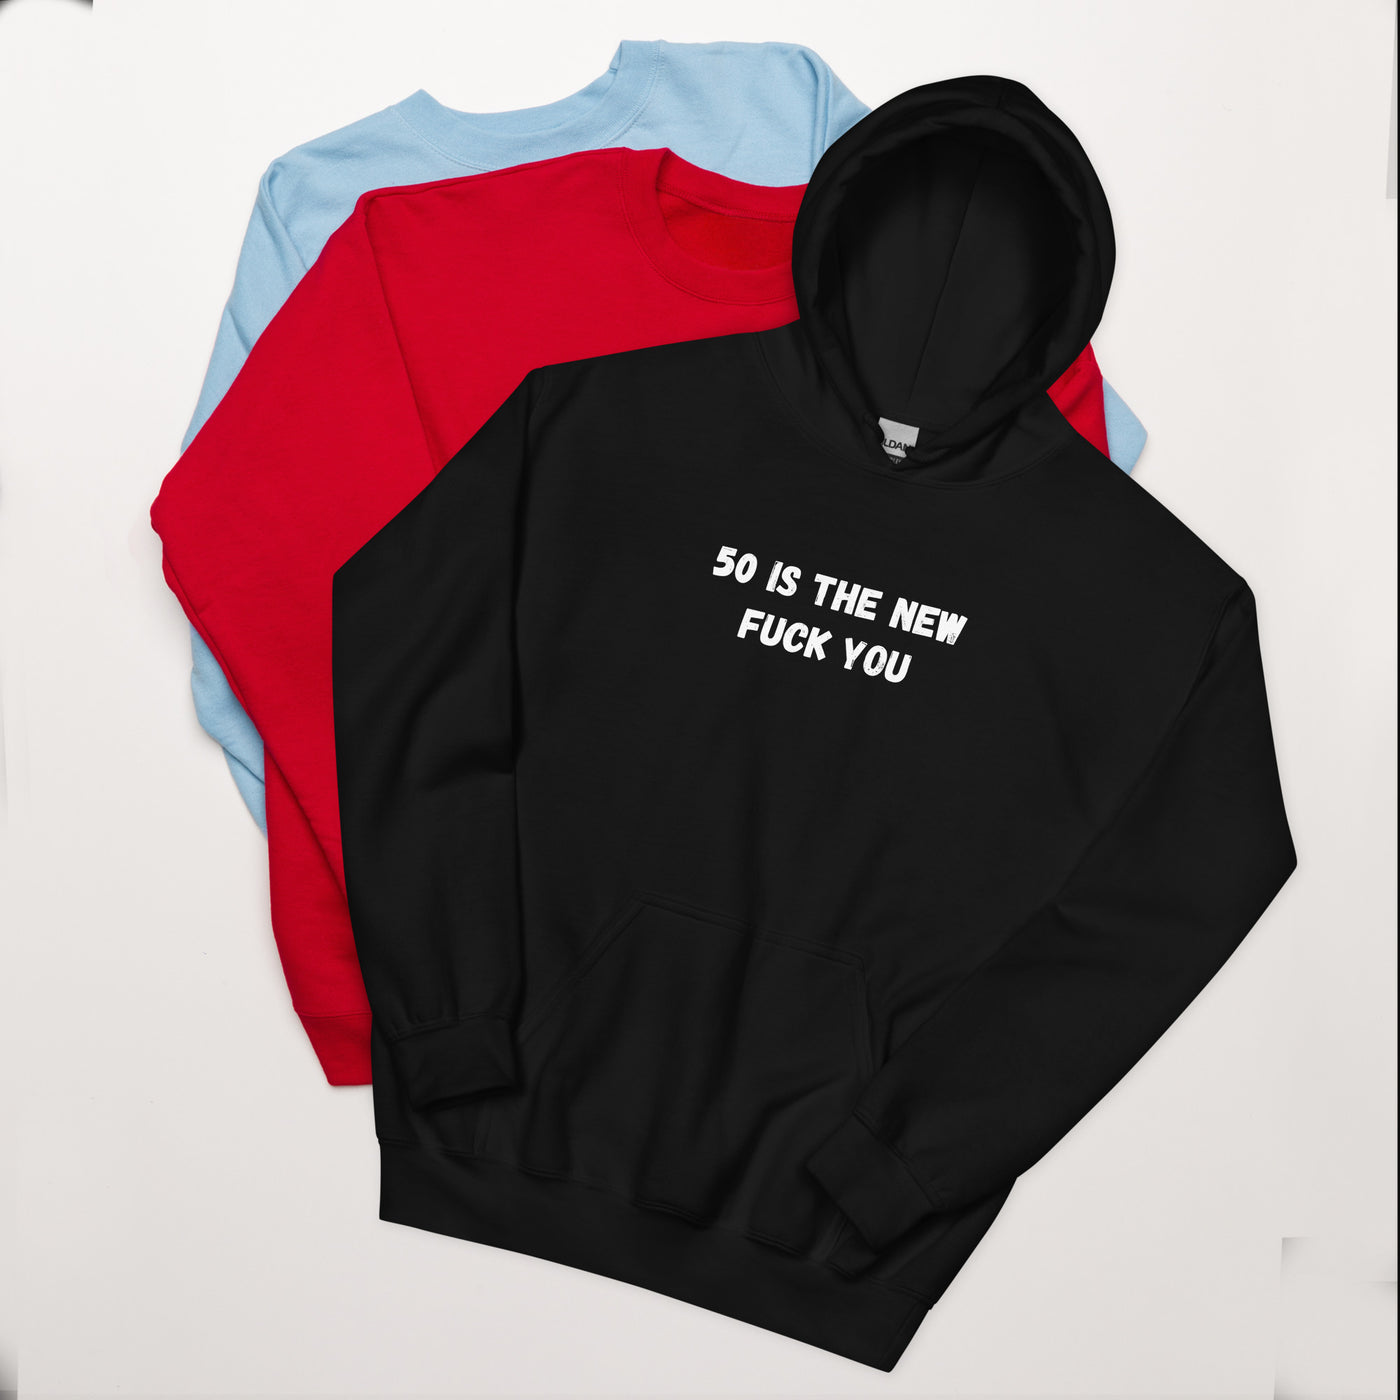 50 Is The New F Word  Hoodie